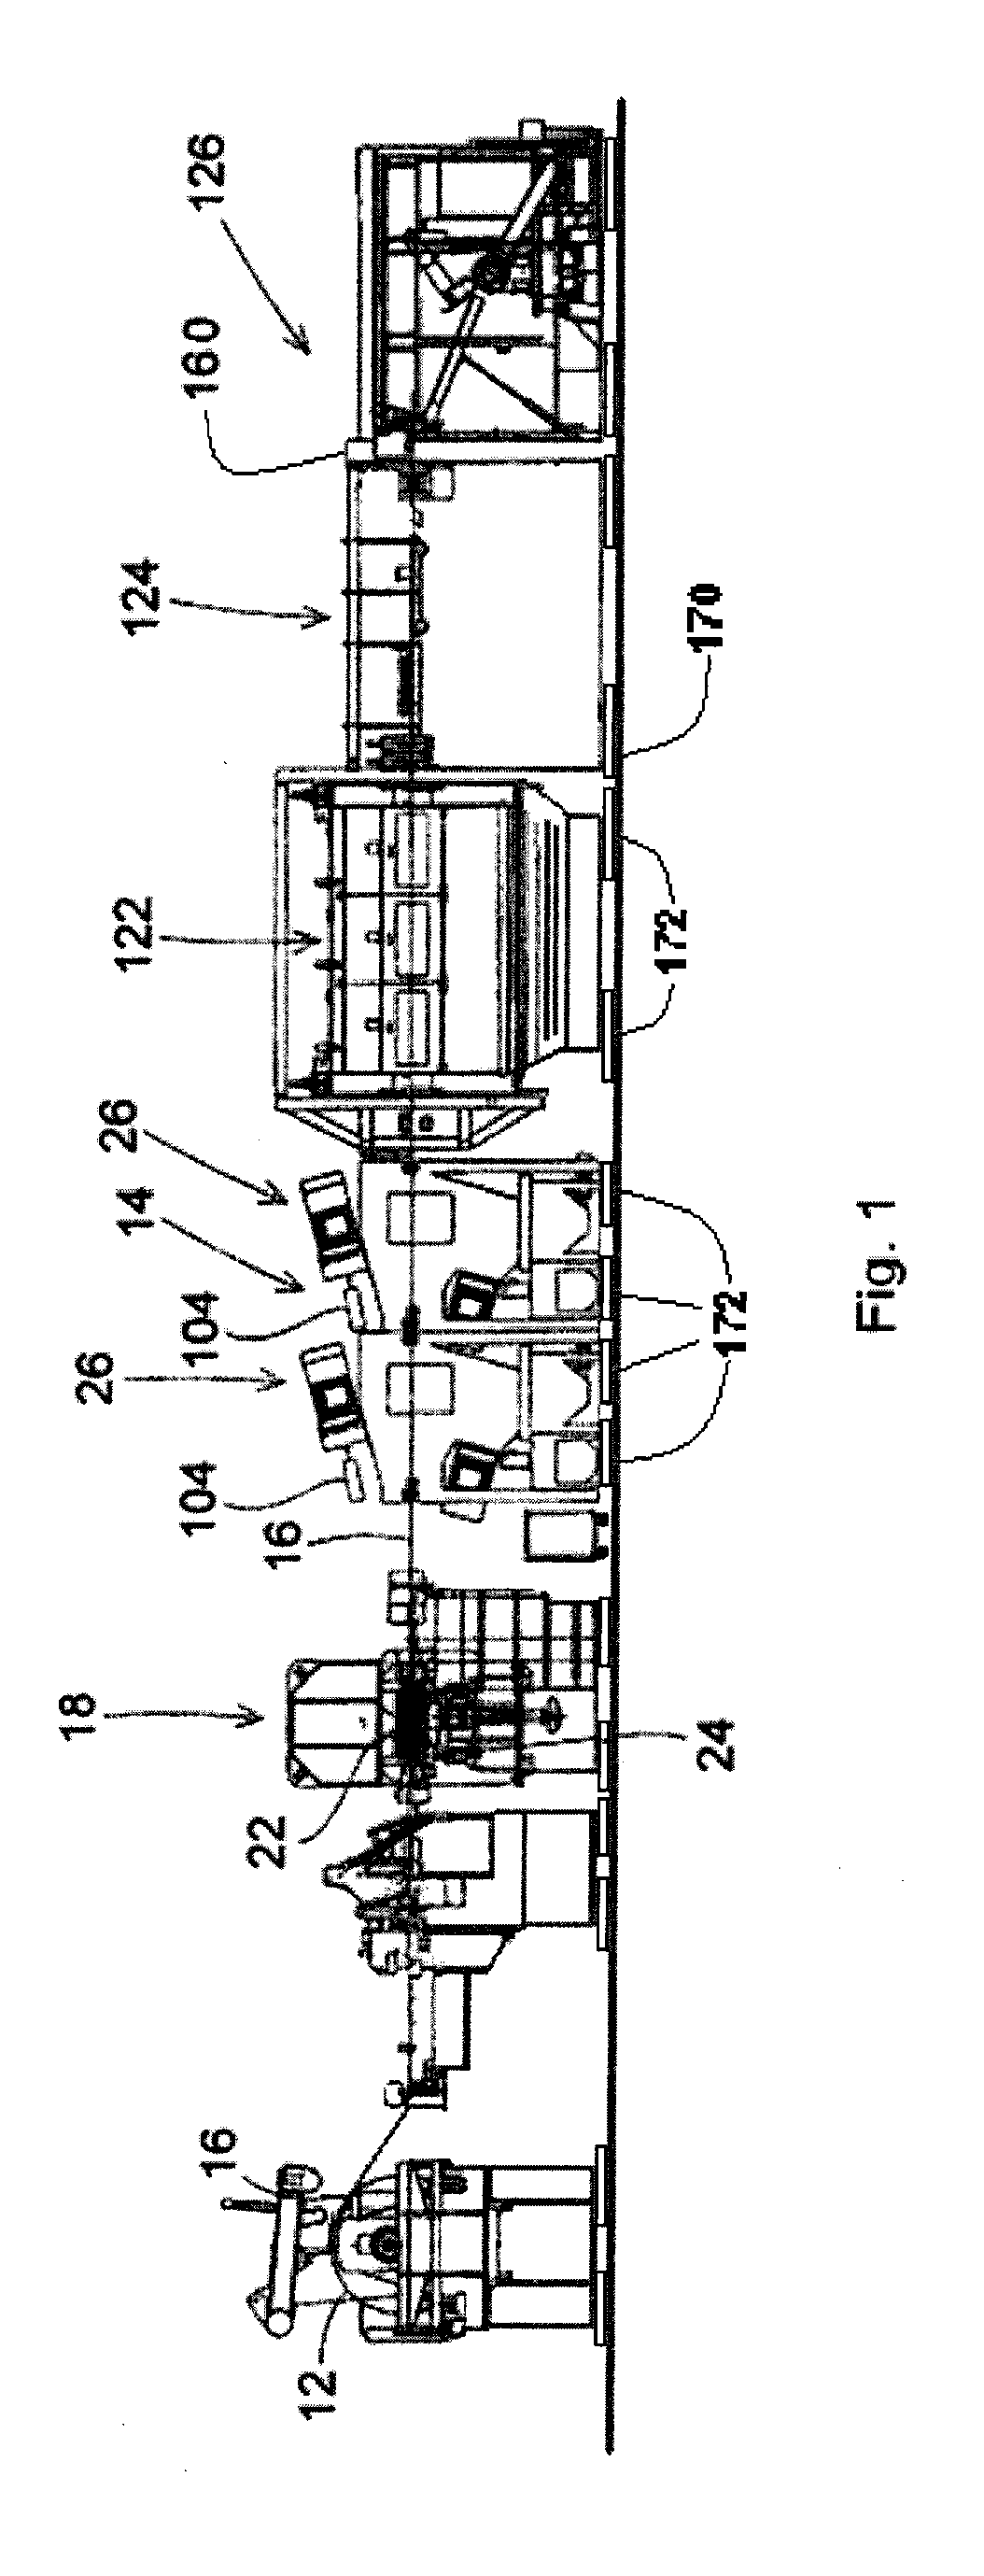 Method of Producing Rust Inhibitive Sheet Metal Through Scale Removal with a Slurry Blasting Descaling Cell